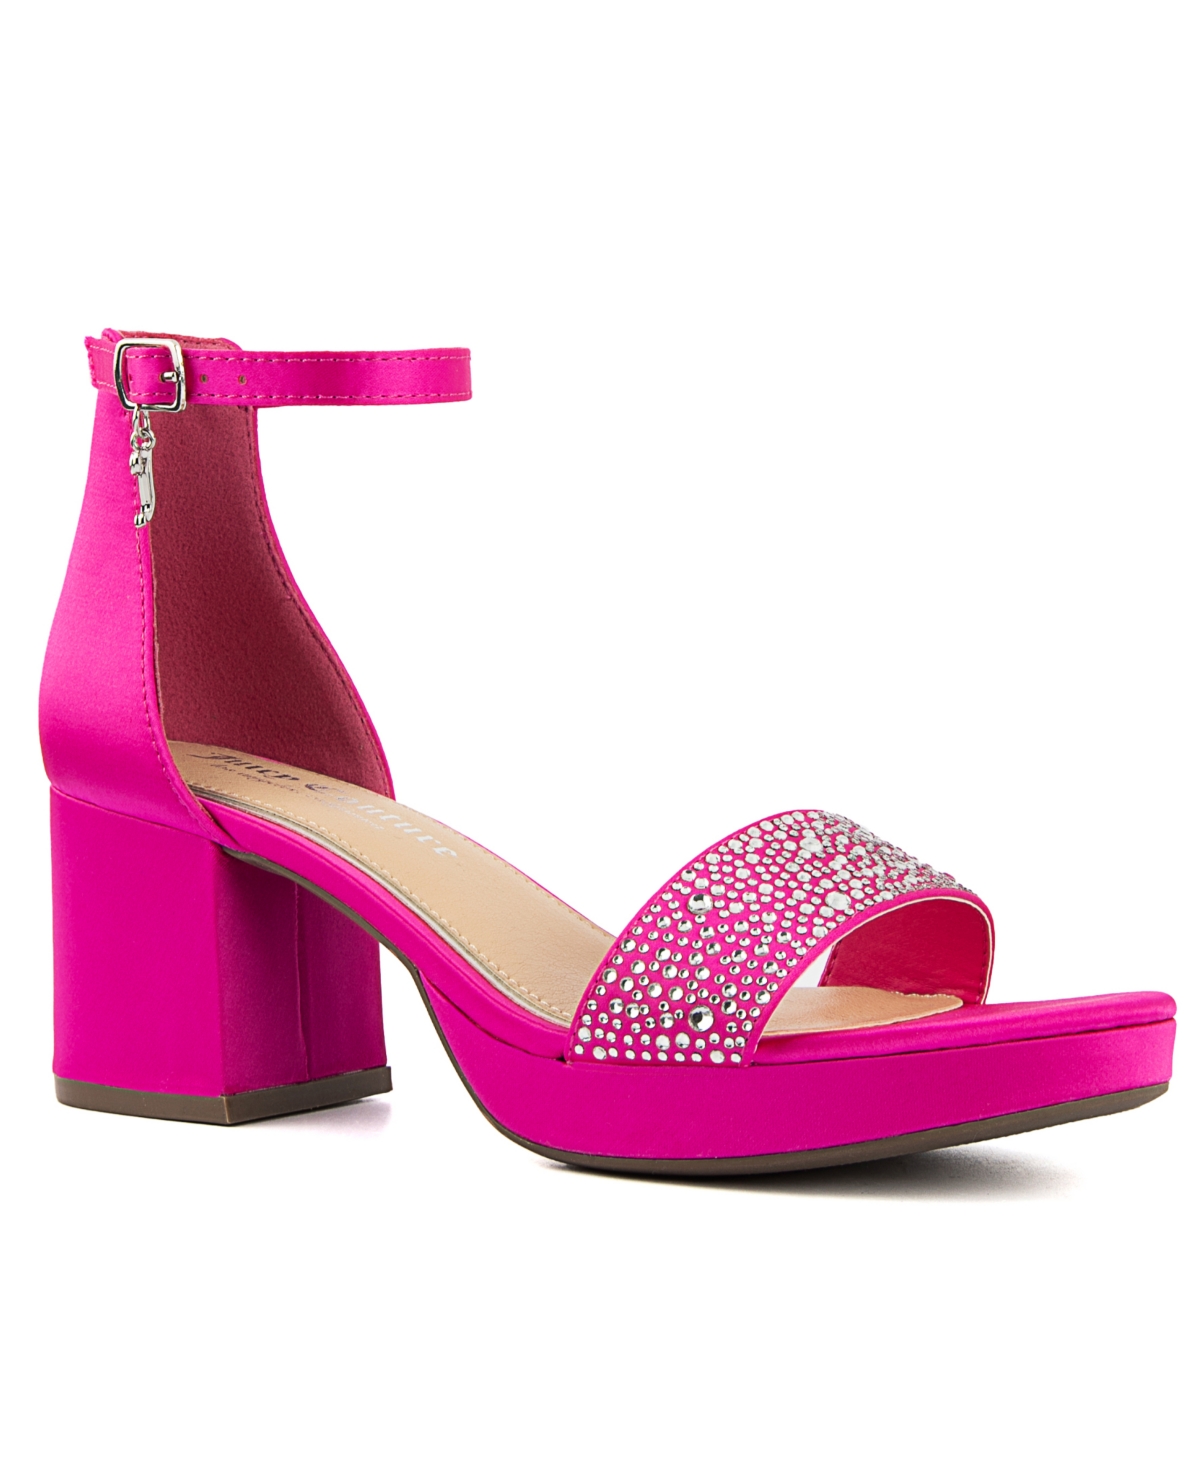 Juicy Couture Women's Nelly Dress Sandal In Pink Satin